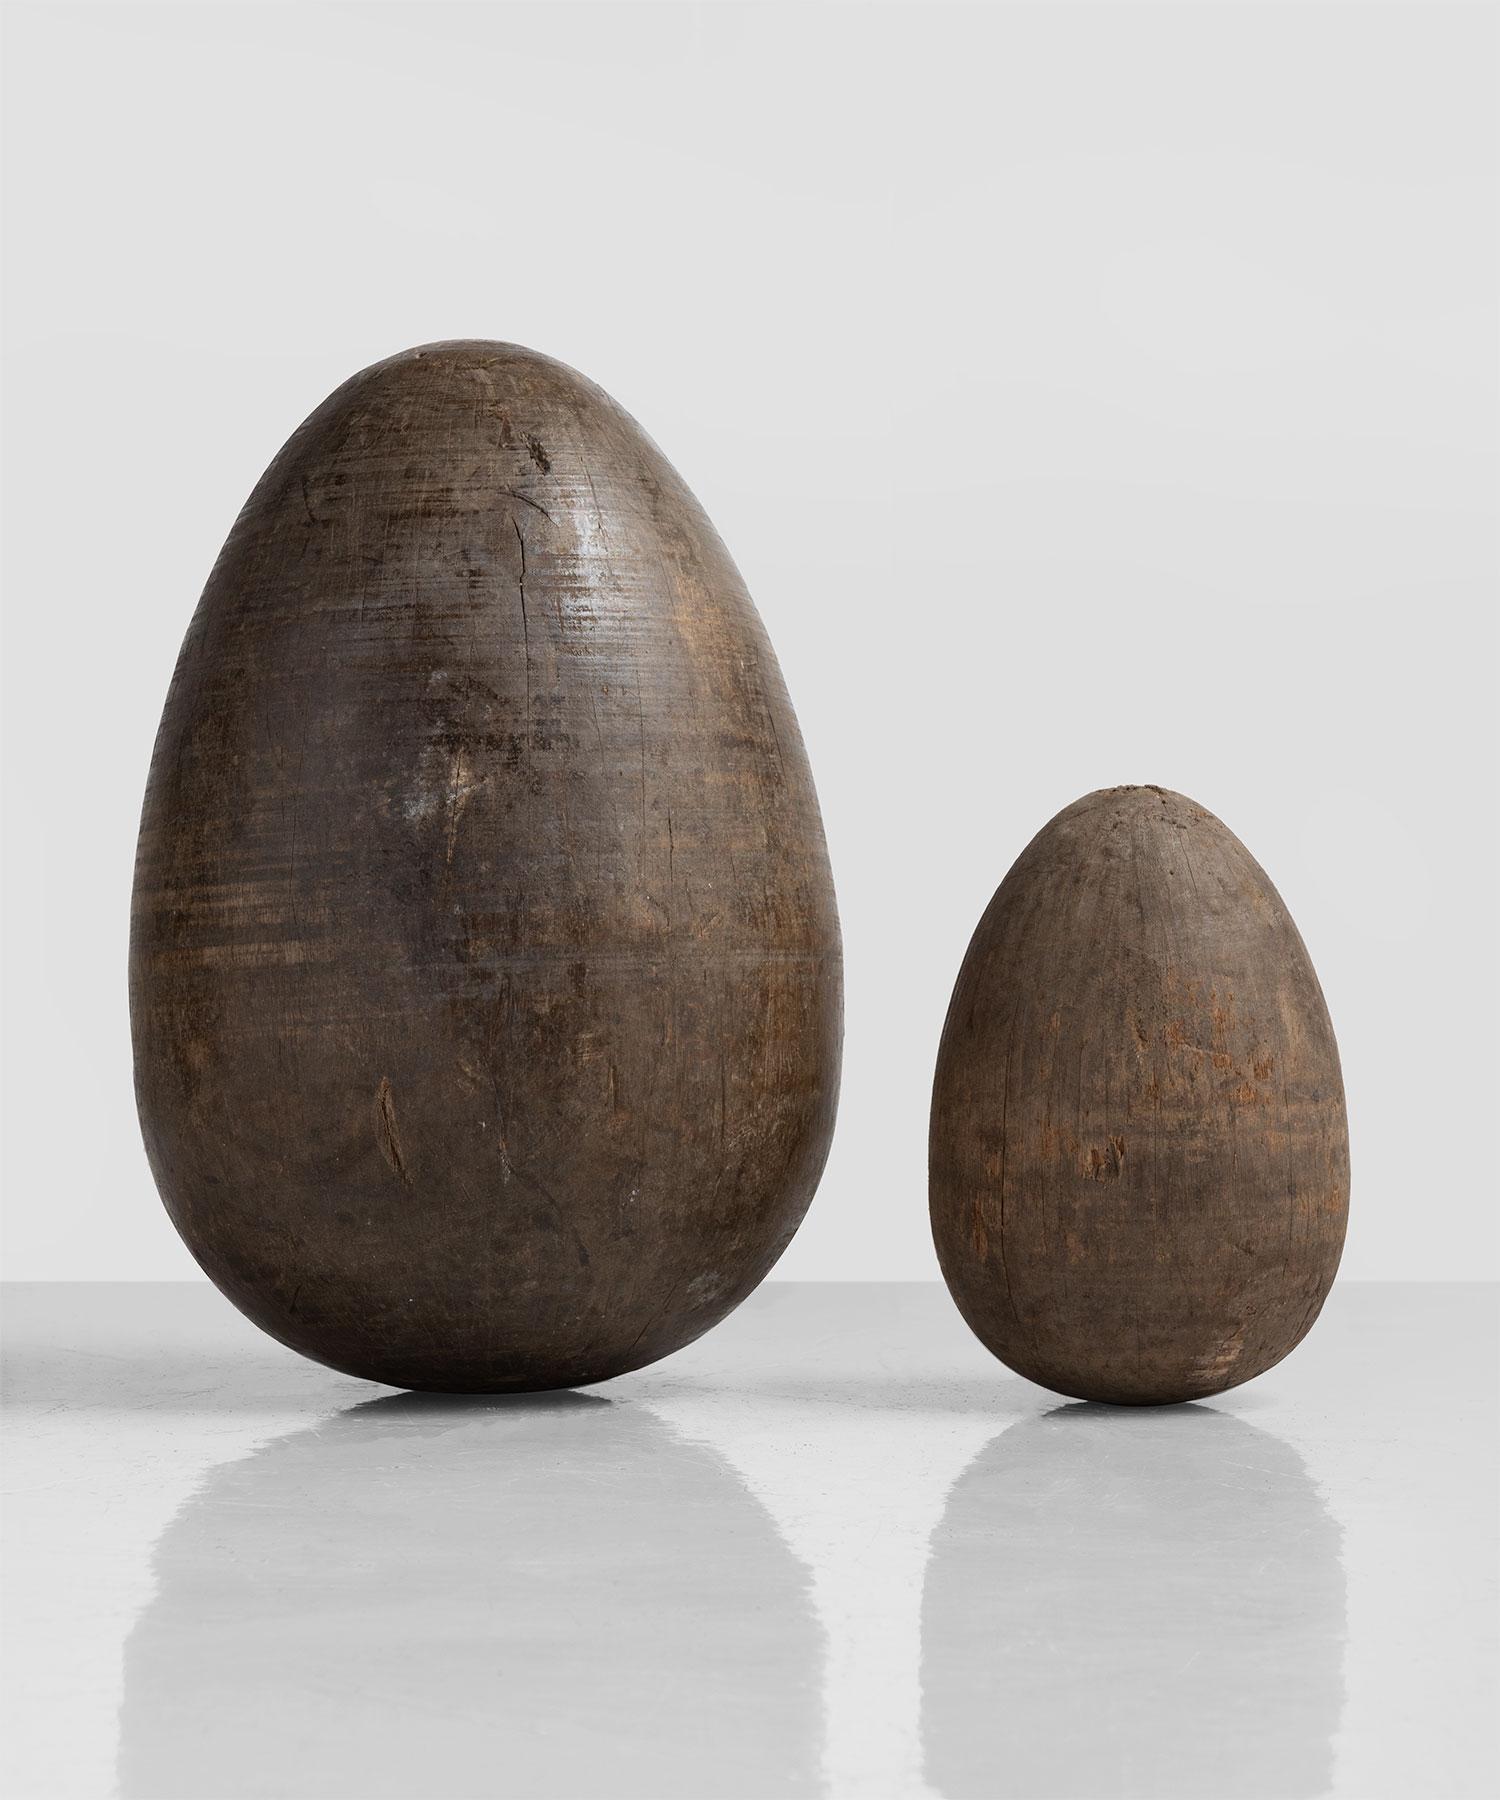 Set of two Wooden Egg Moulds, England, circa 1890.

Heavily patinated forms originally used to make papier mache forms.

Measures: 11.5